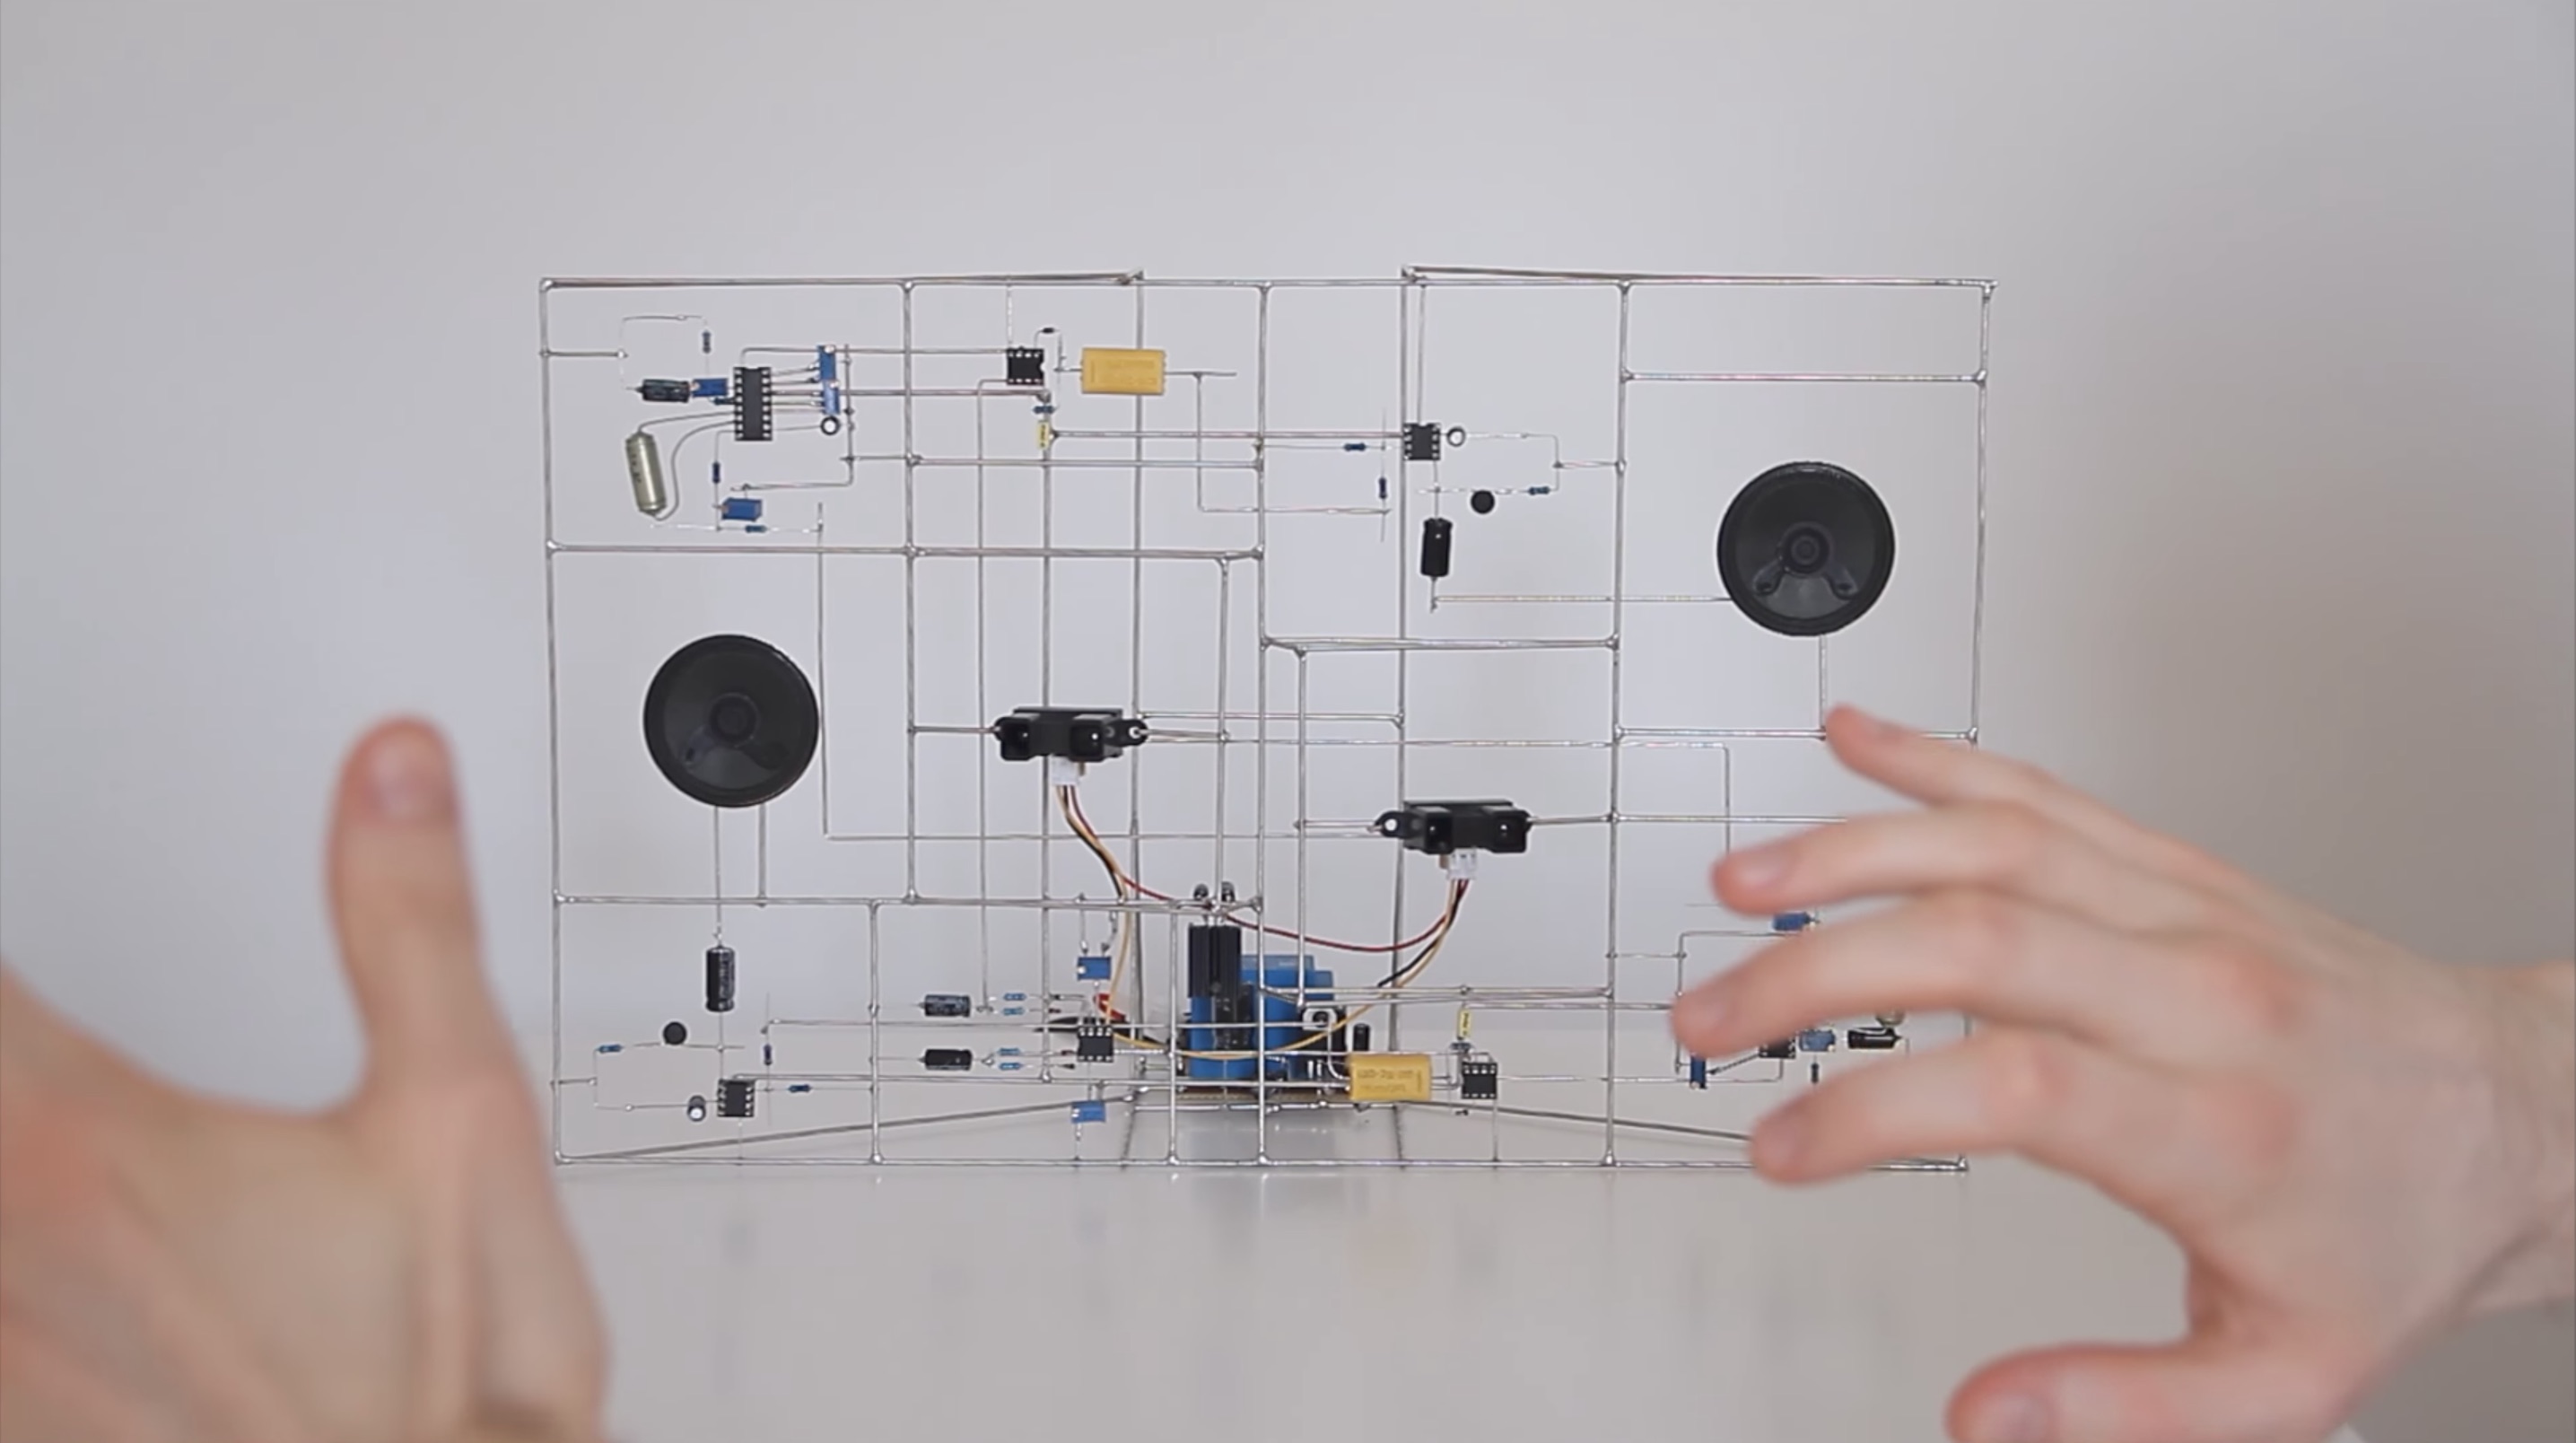 A circuit, but the wires are the structure instead of them being traces on the board. There are two speakers integrated in the structure, and hands in the foreground.